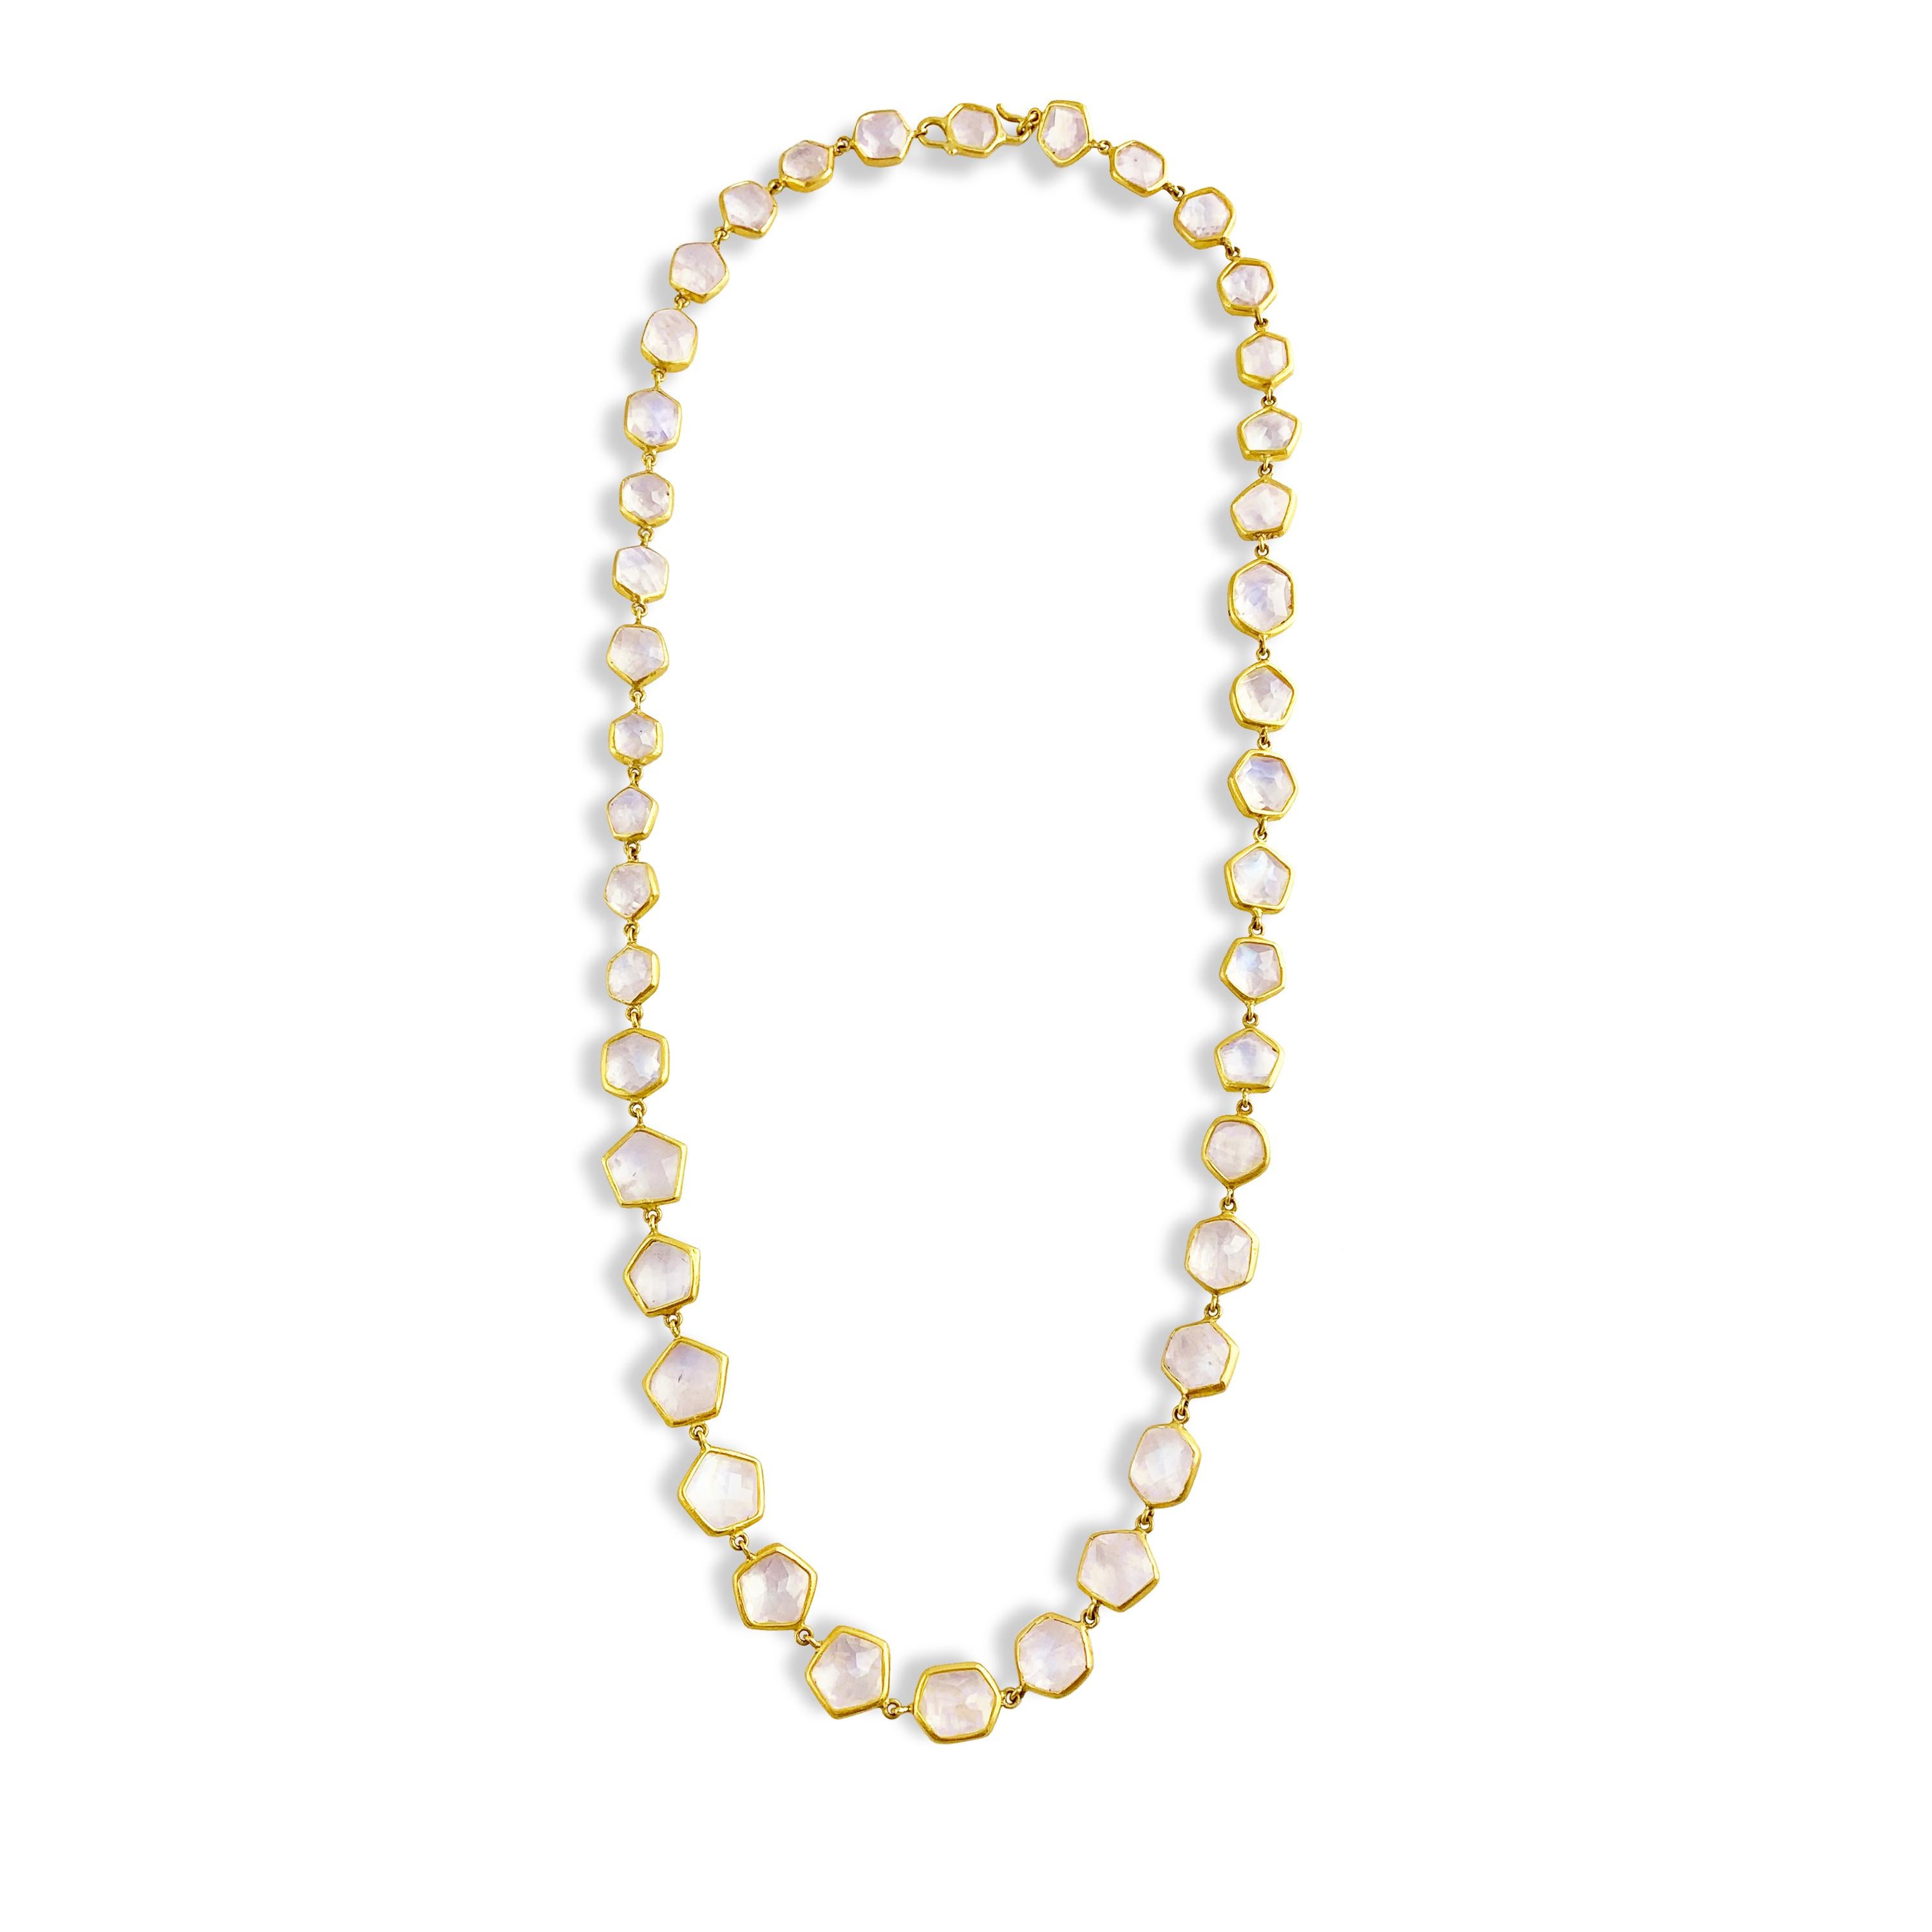 Designed with 85.30-carats of glistening rainbow moonstone , this 22-karat gold necklace has an ethereal quality. Wear this investment piece against a softly hued dress.
The necklace measures 20